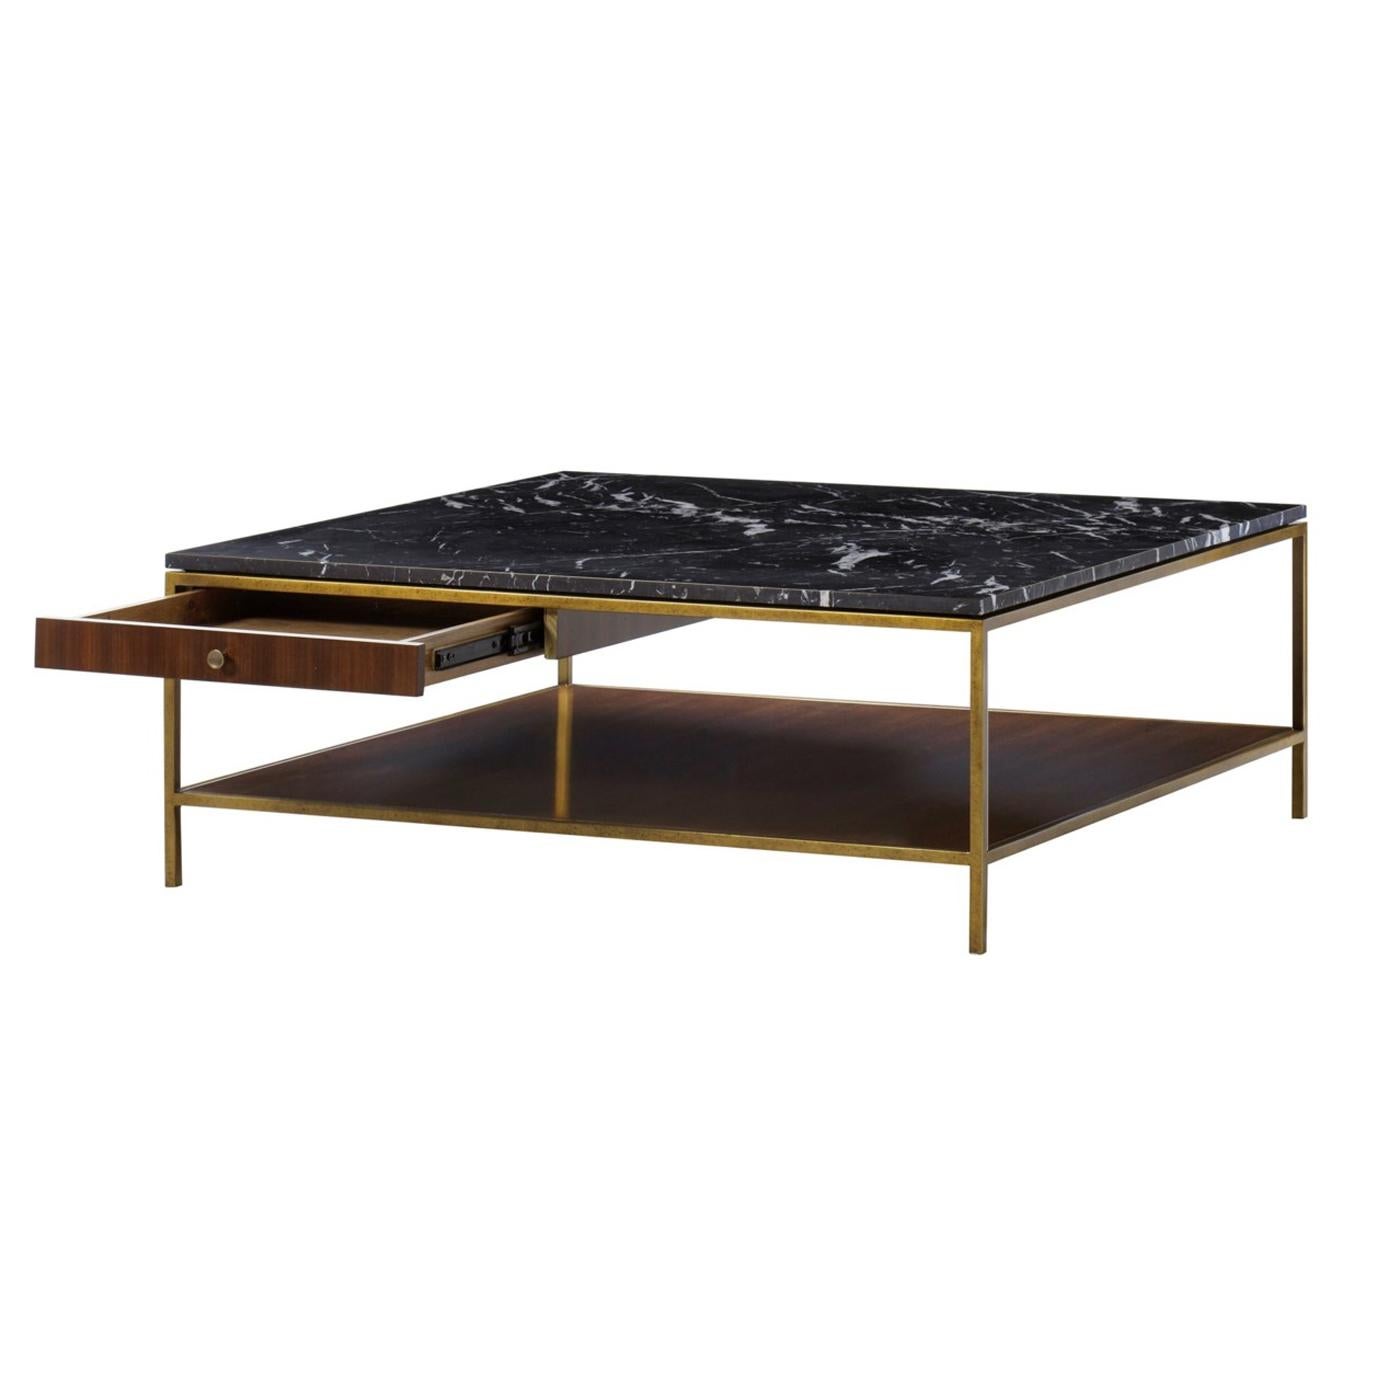 Coffee table Carolina with structure in metal in brass
finish with solid oak and walnut structure. With black
marquina marble top. Side table including 1 drawer.